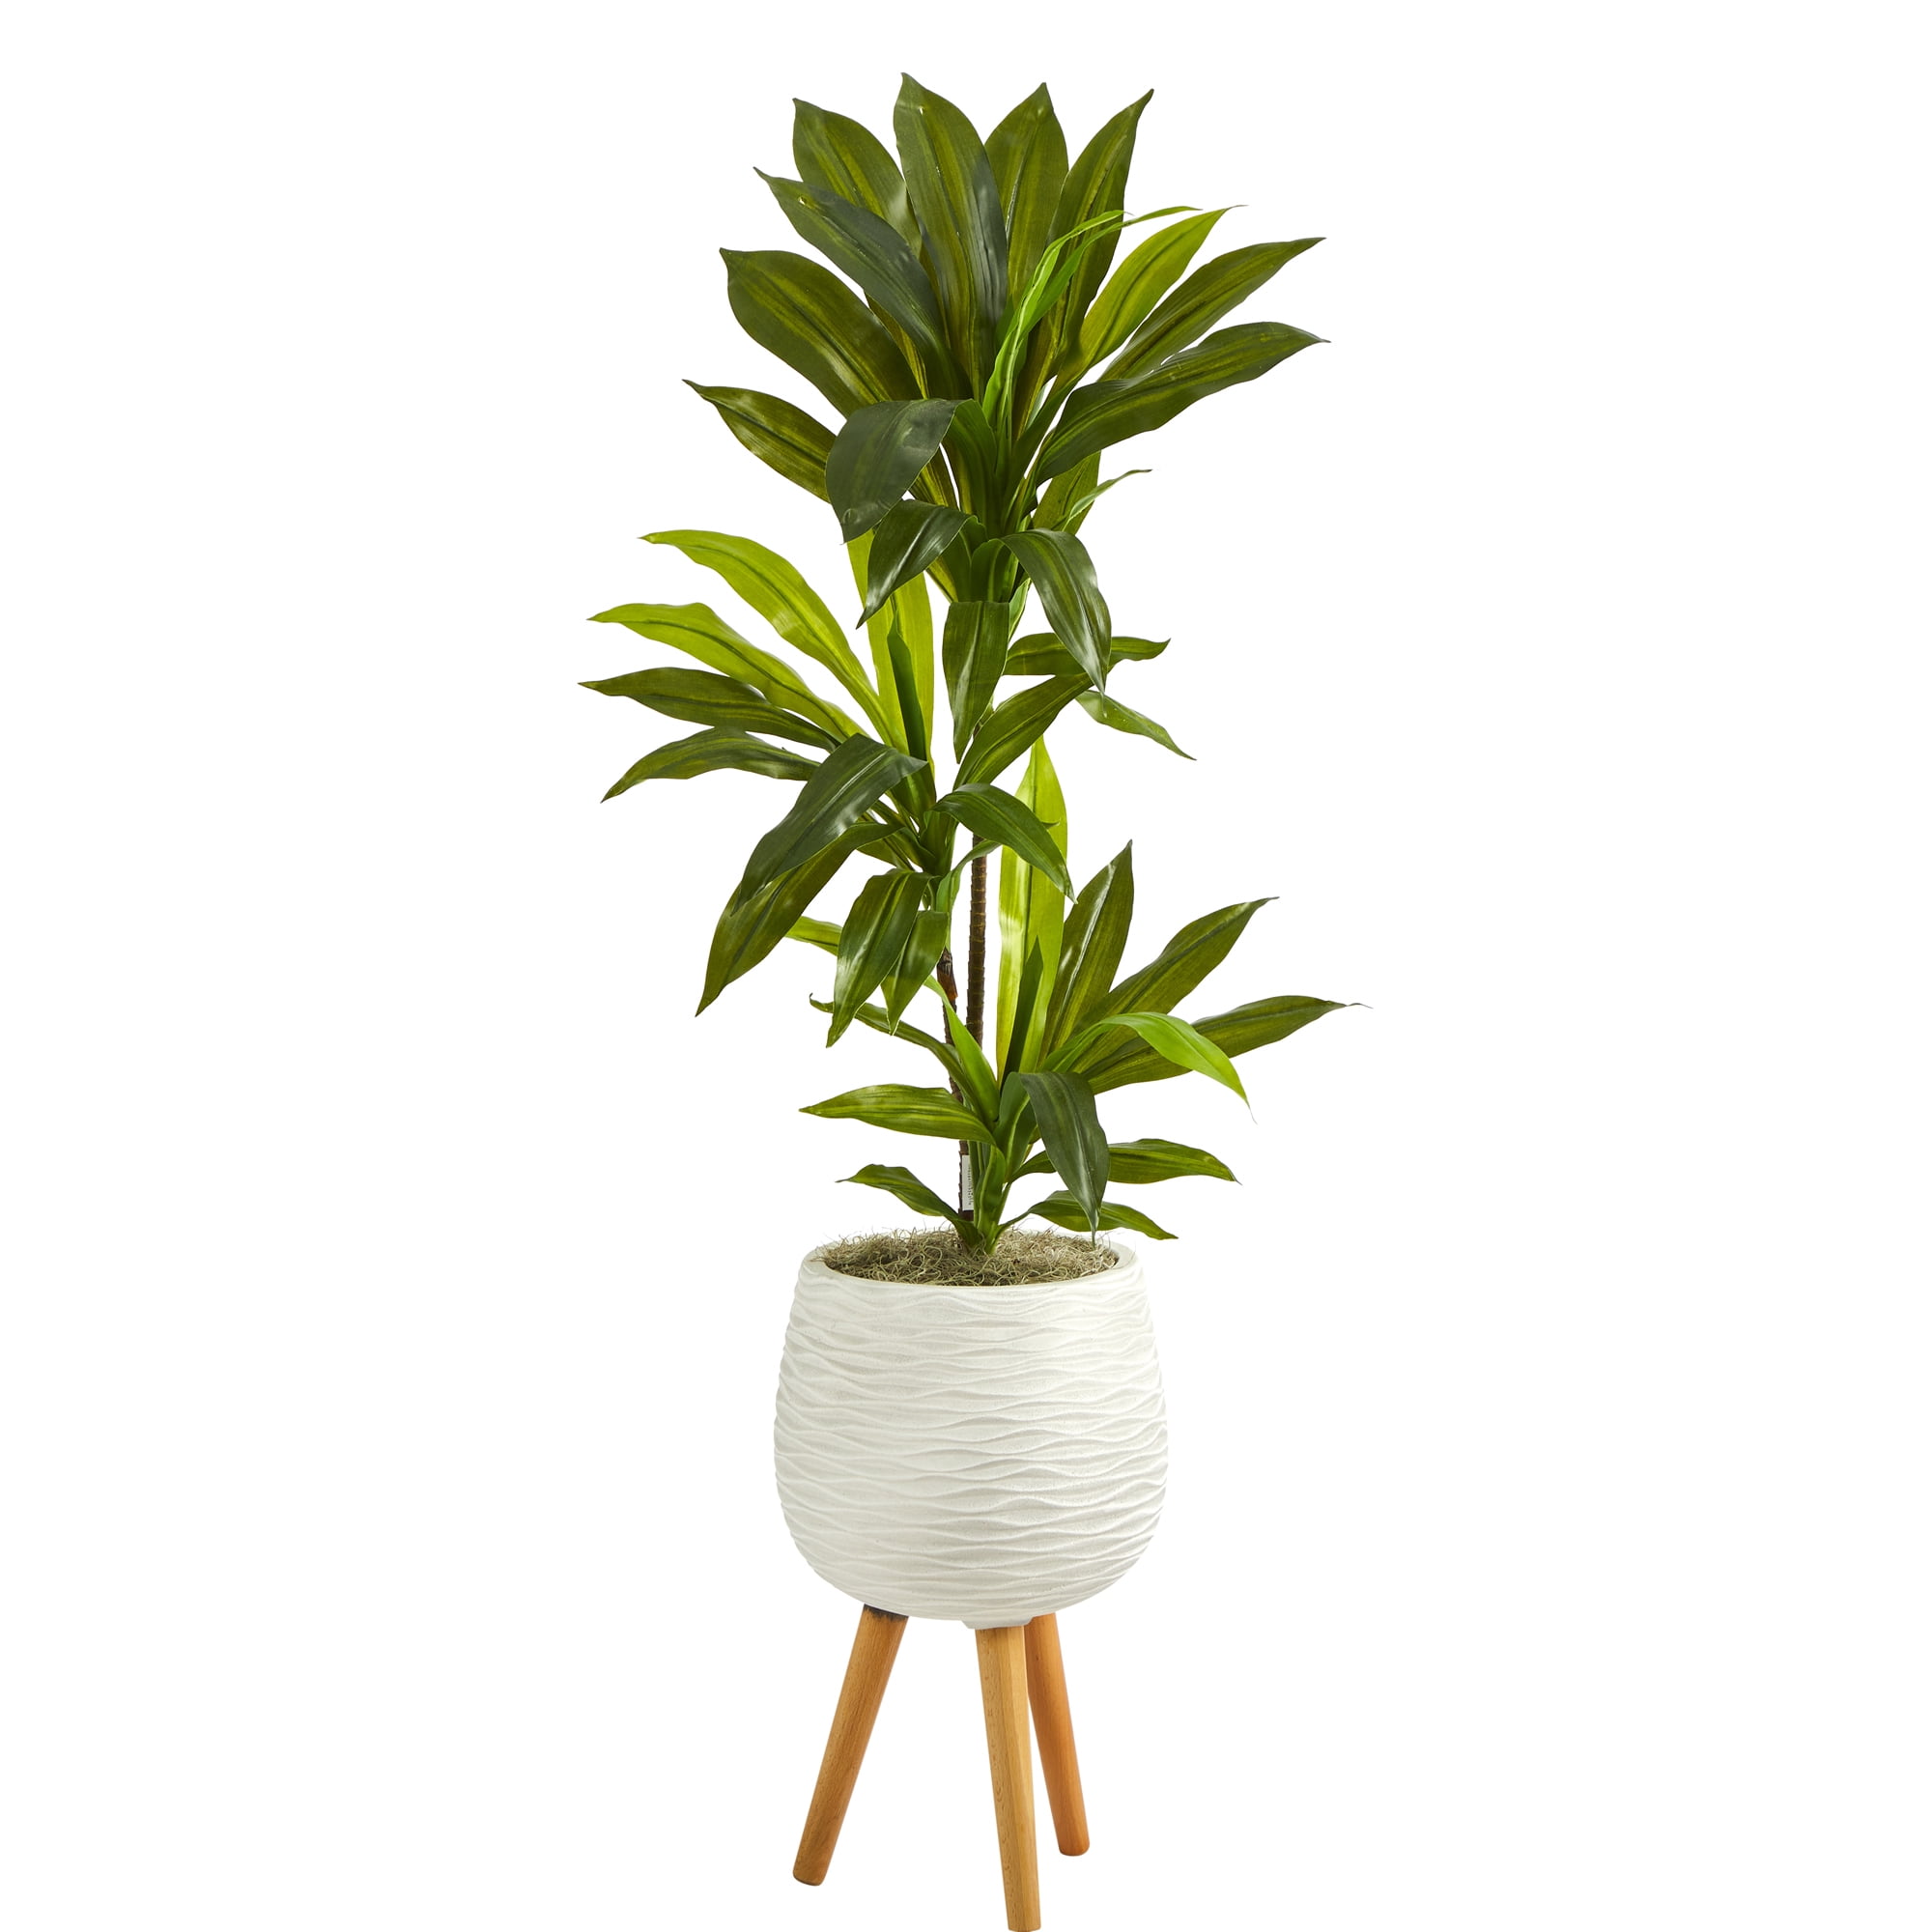 How to Pot an Artificial Plant using Planters